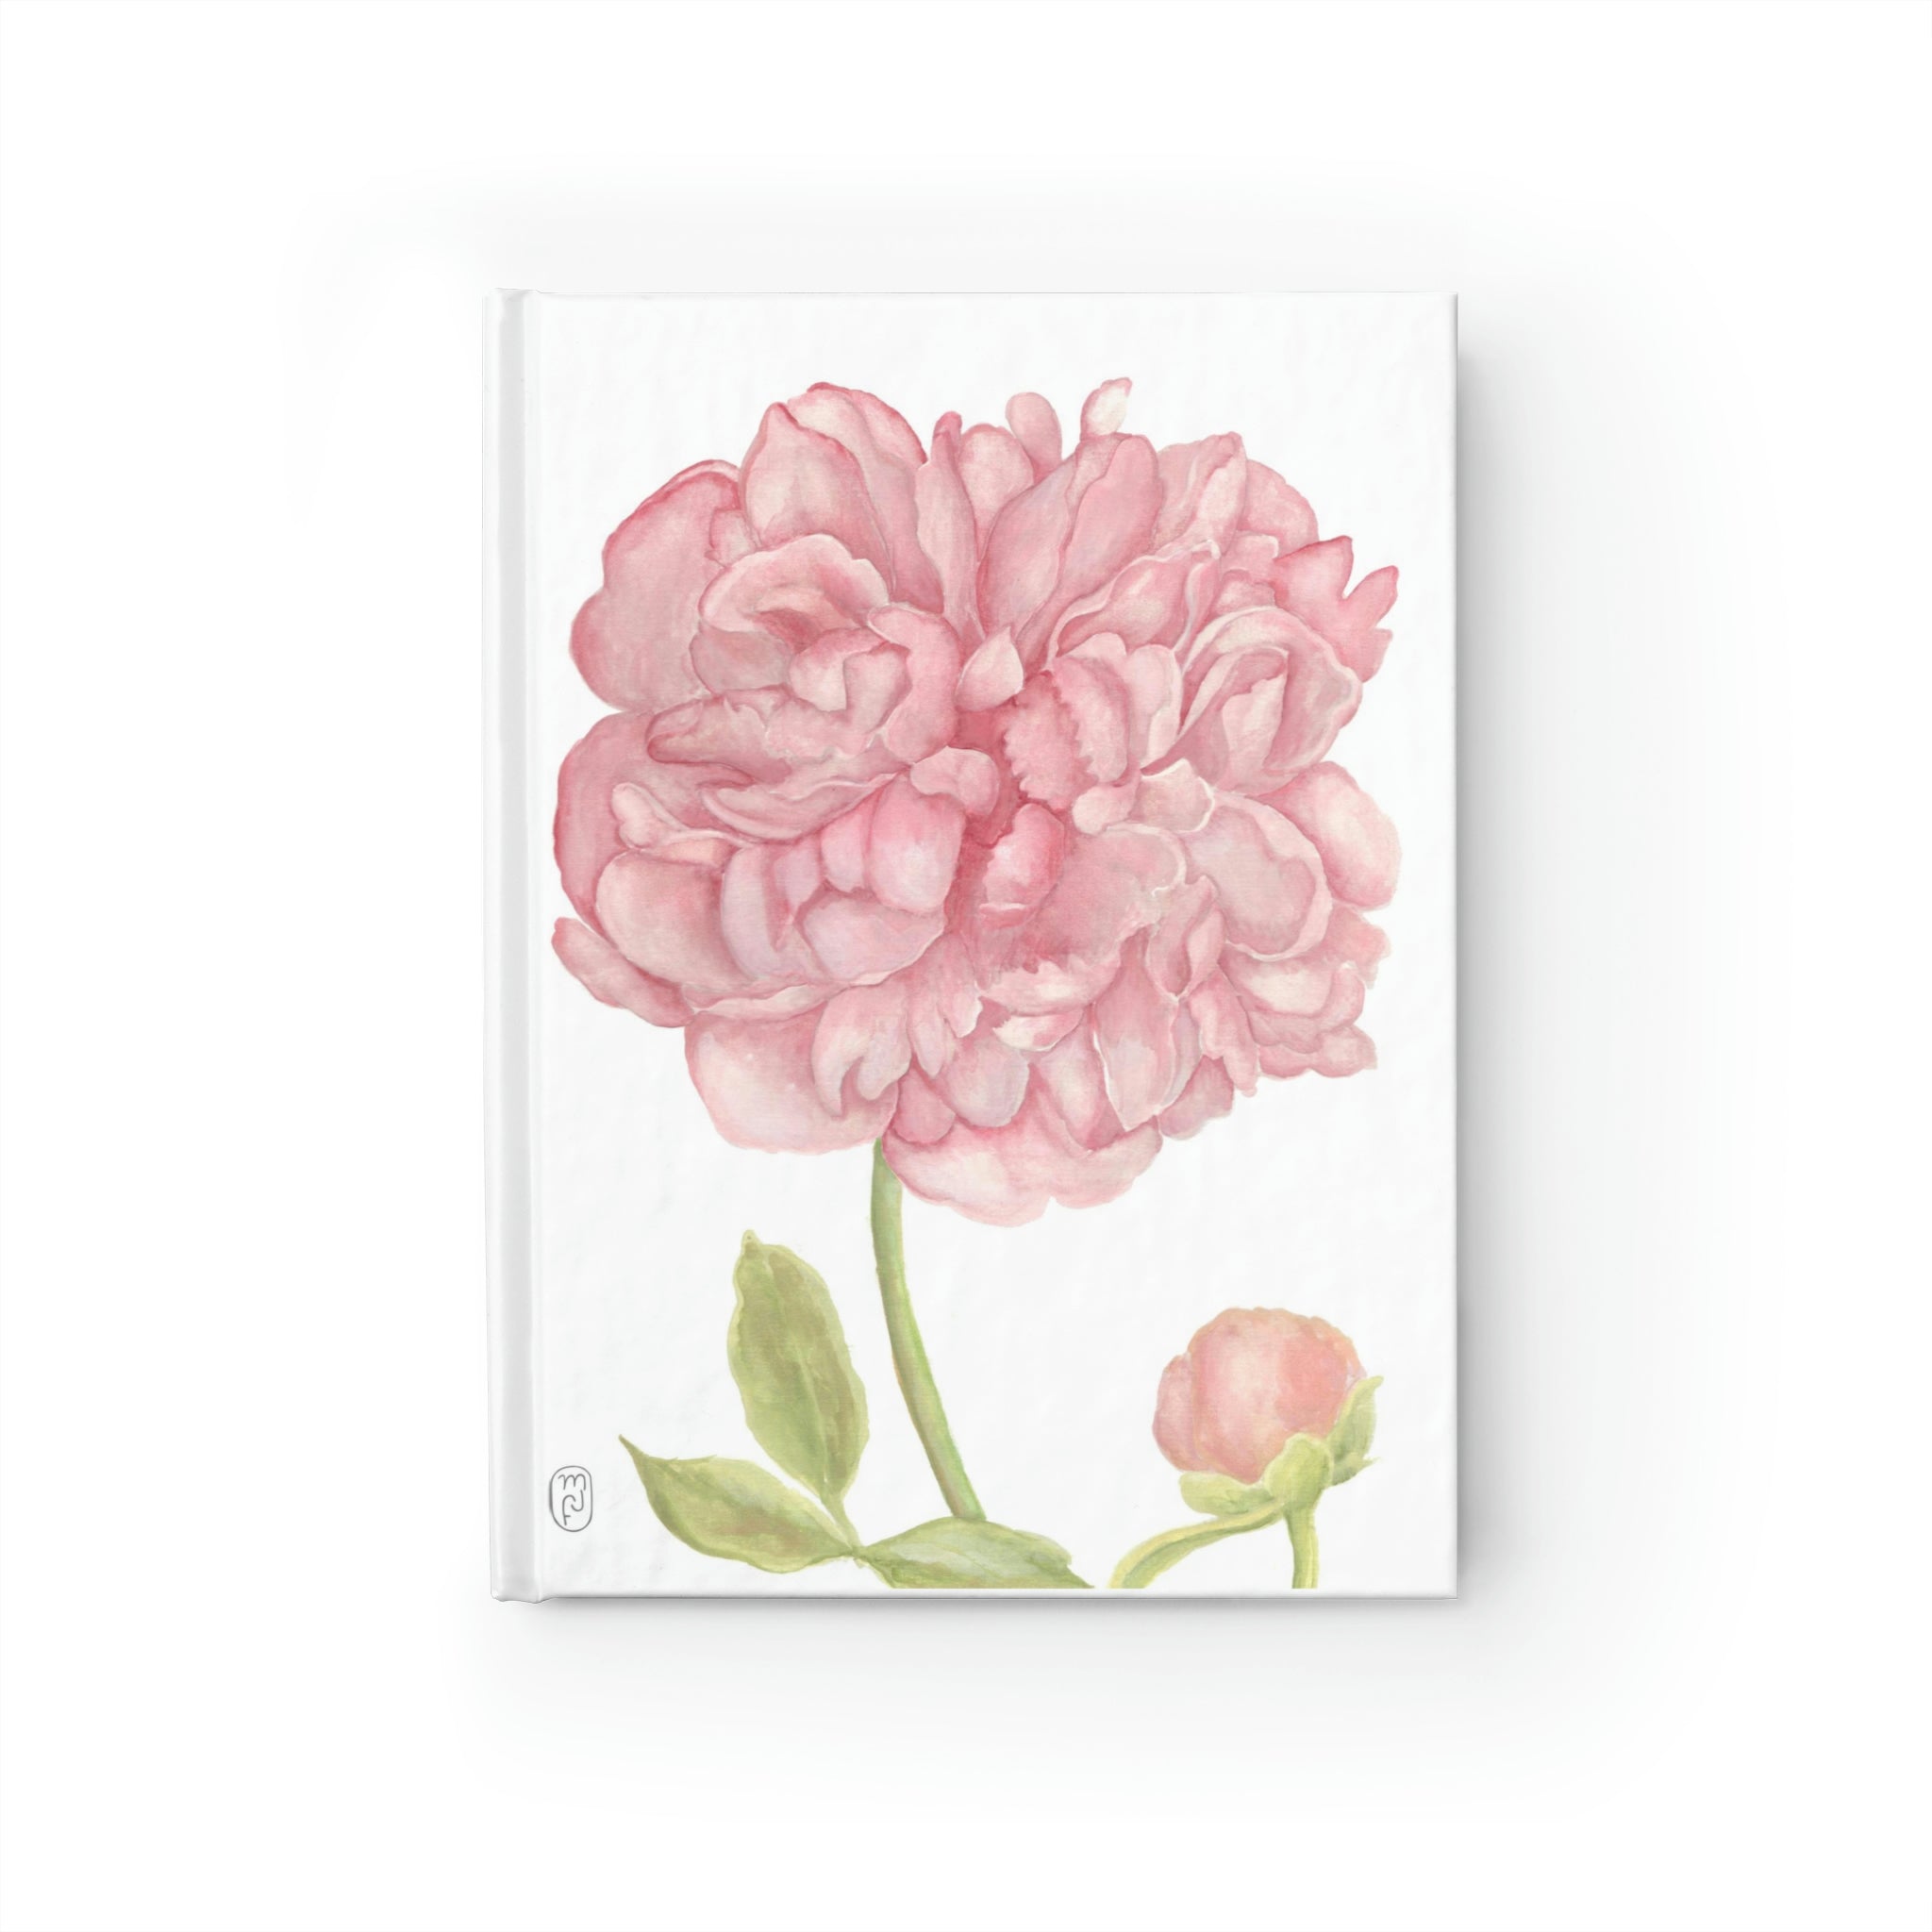 Peony - 5 x 7.25 inches. Ruled Line Journal